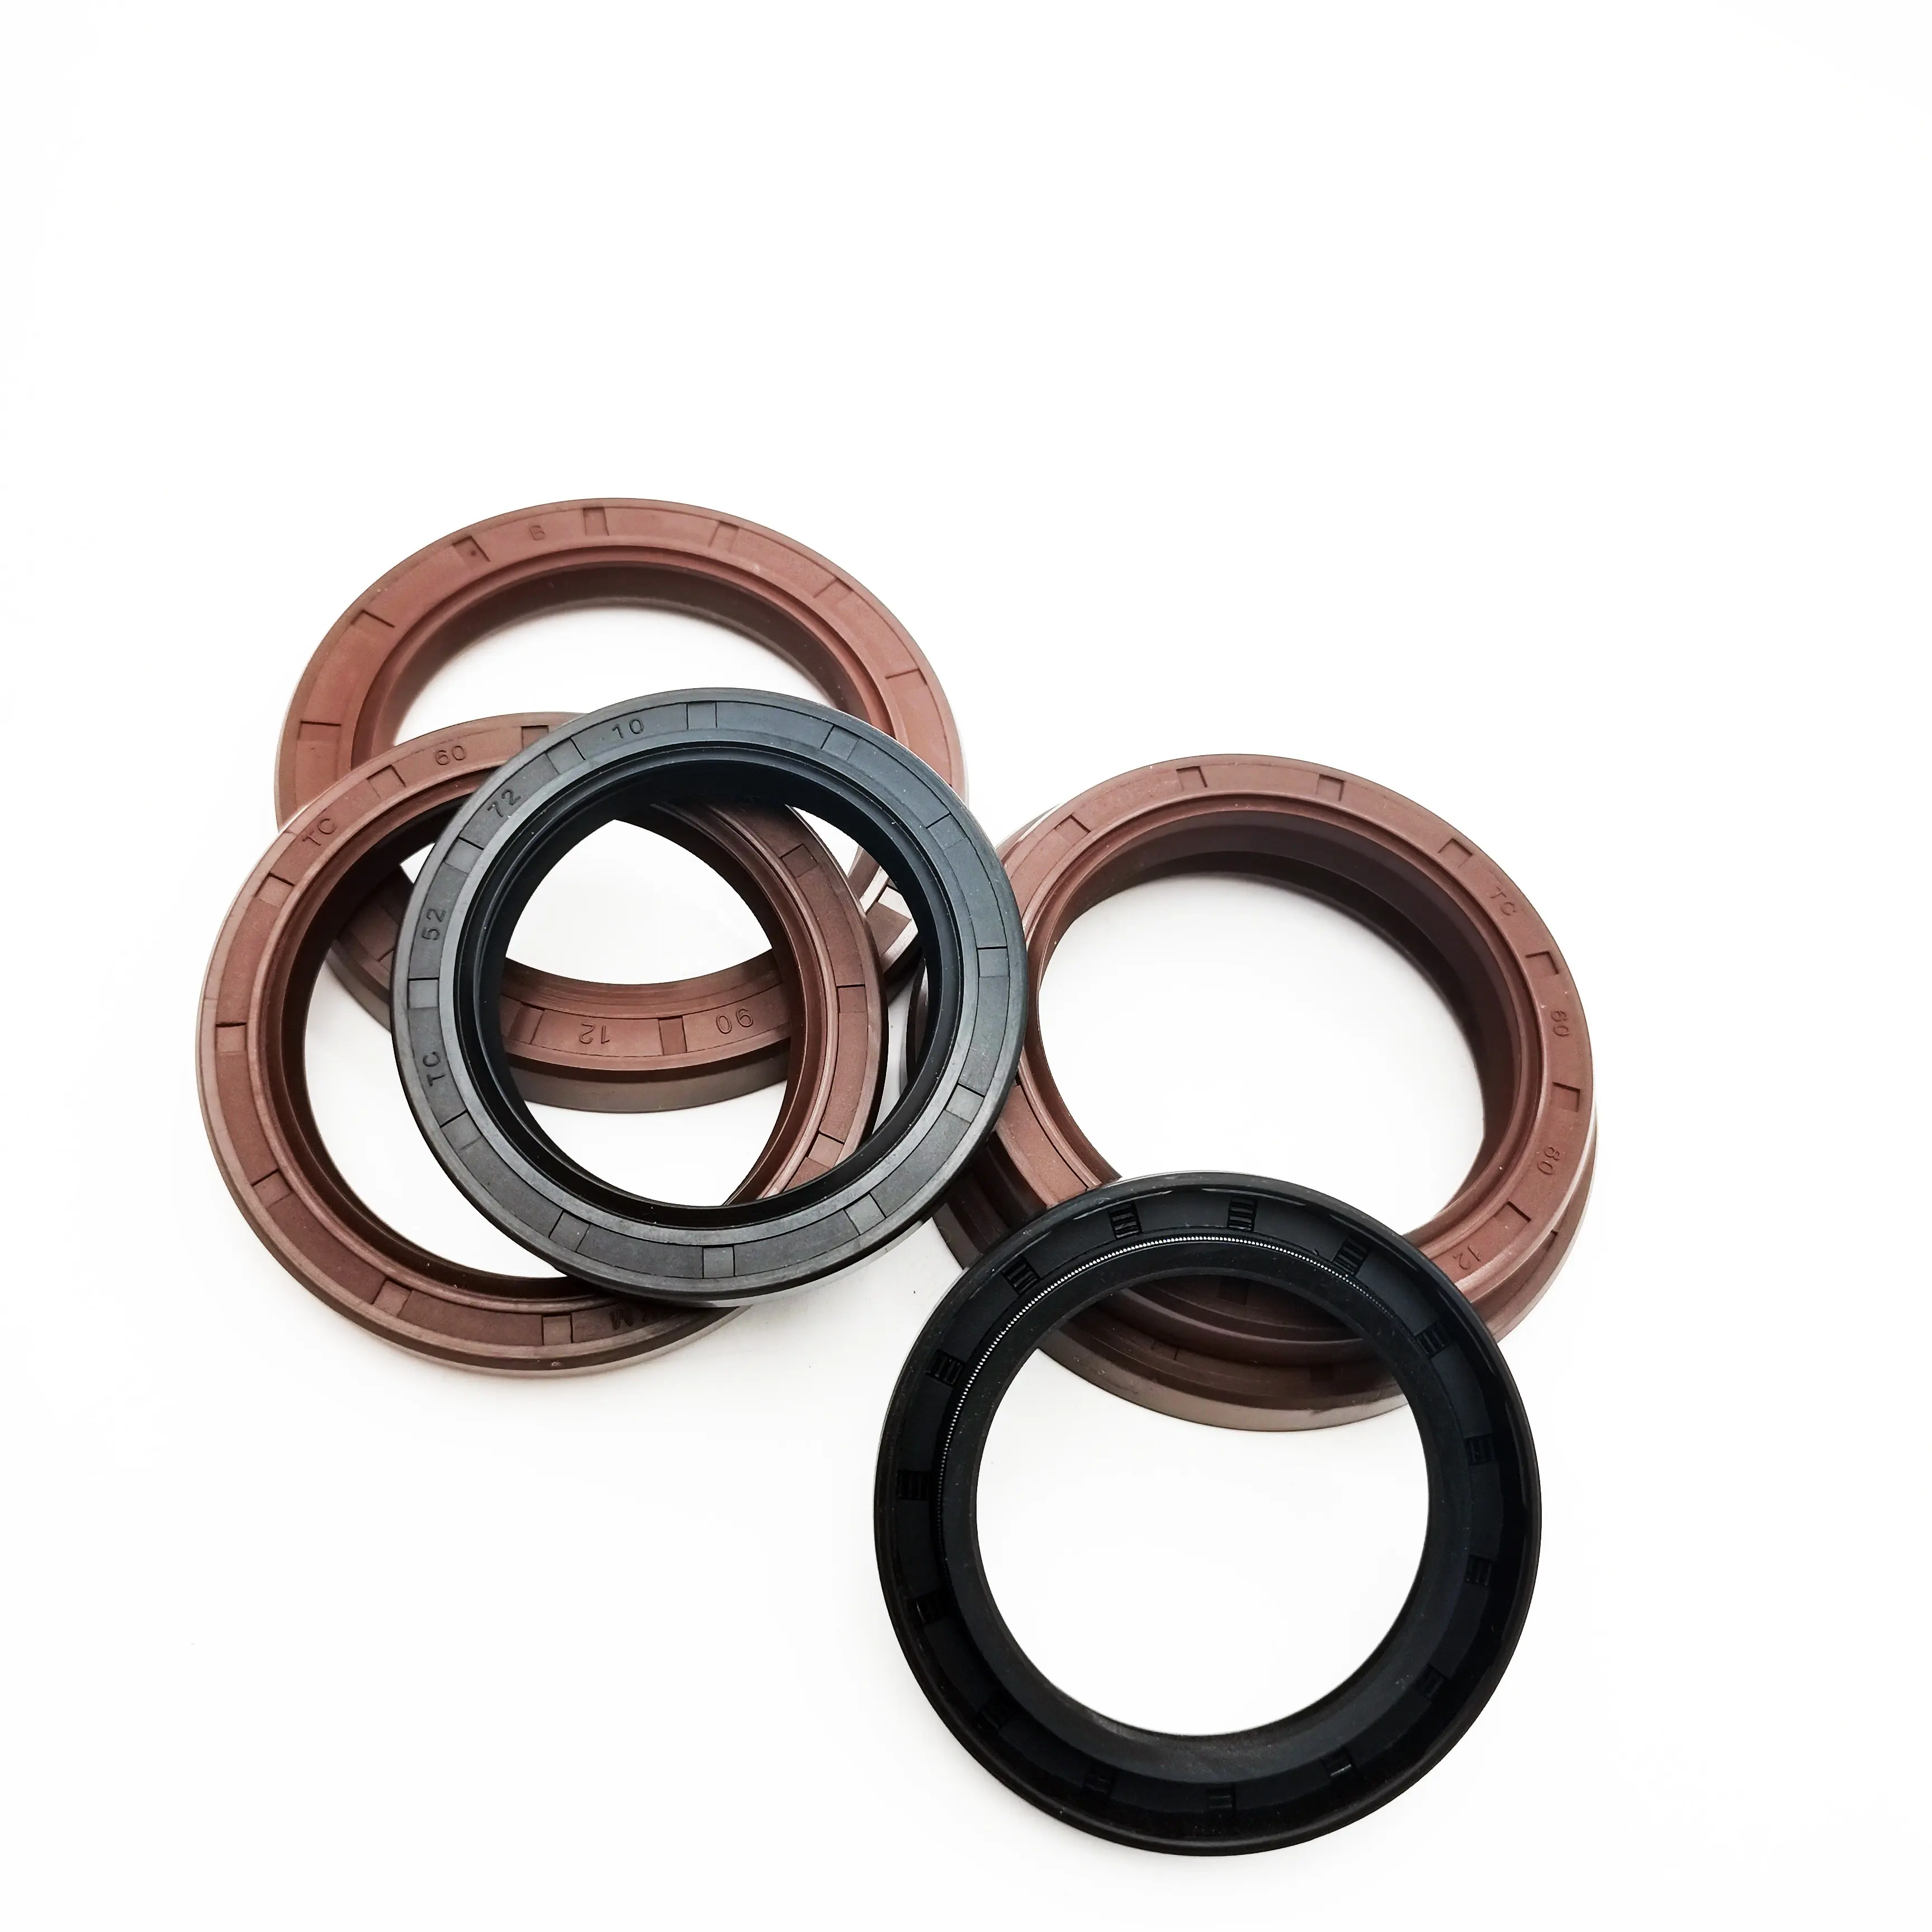 CFNAK High Quality NBR Power Steering Oil Seal High Pressure Size for Auto Parts Manufacturer's Choice Seals